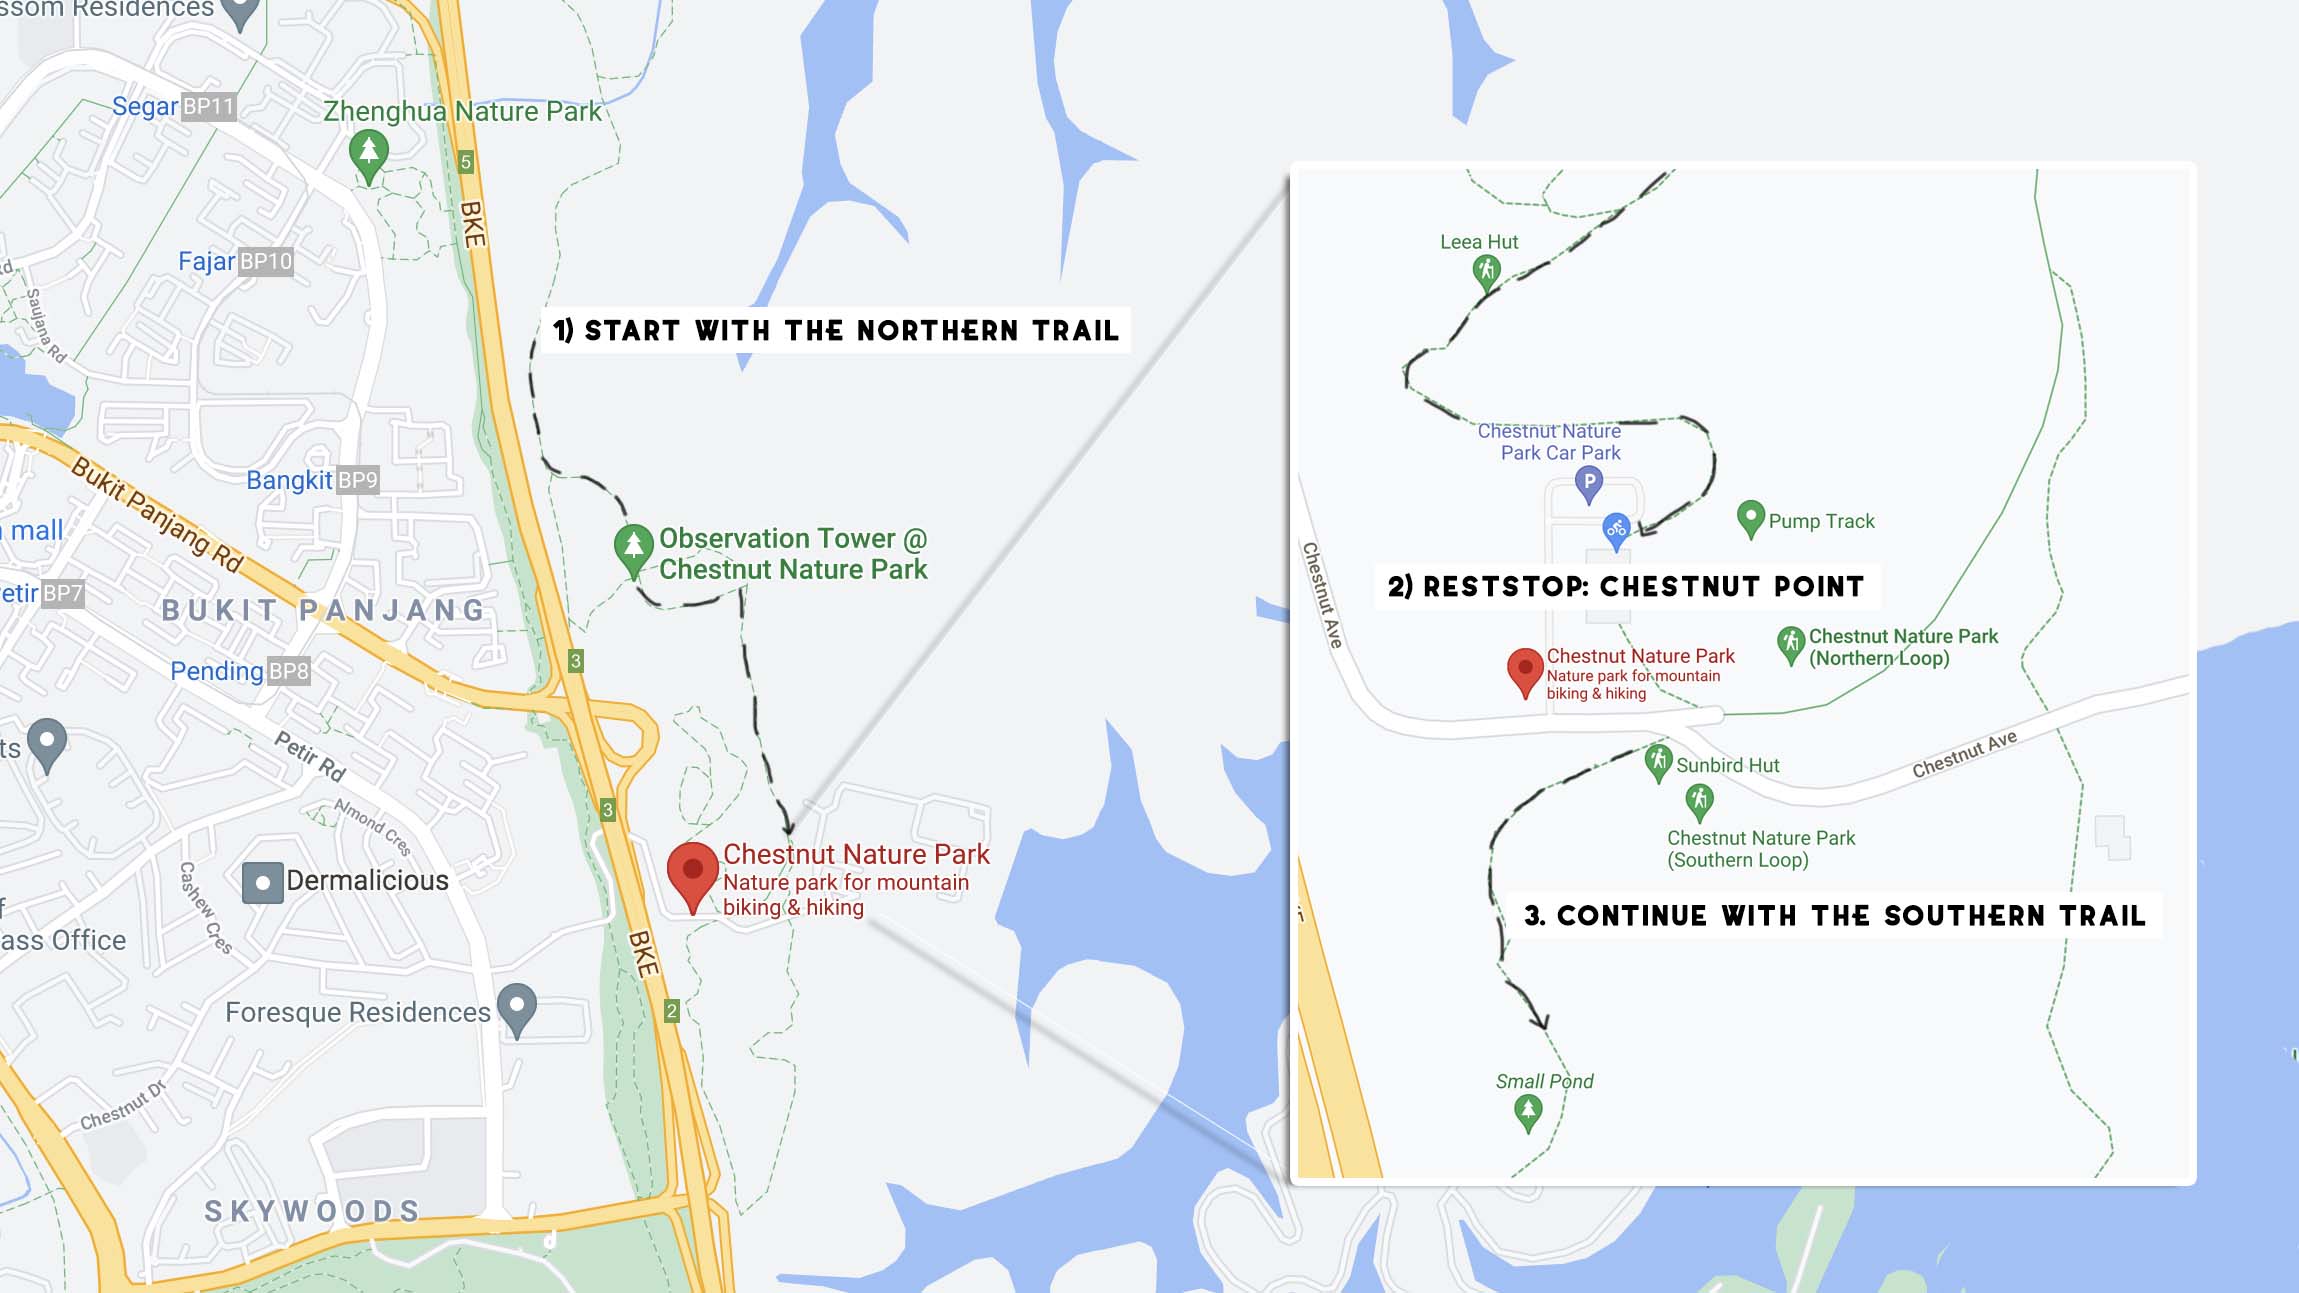 Recommended Route and Map - Chestnut Nature Park